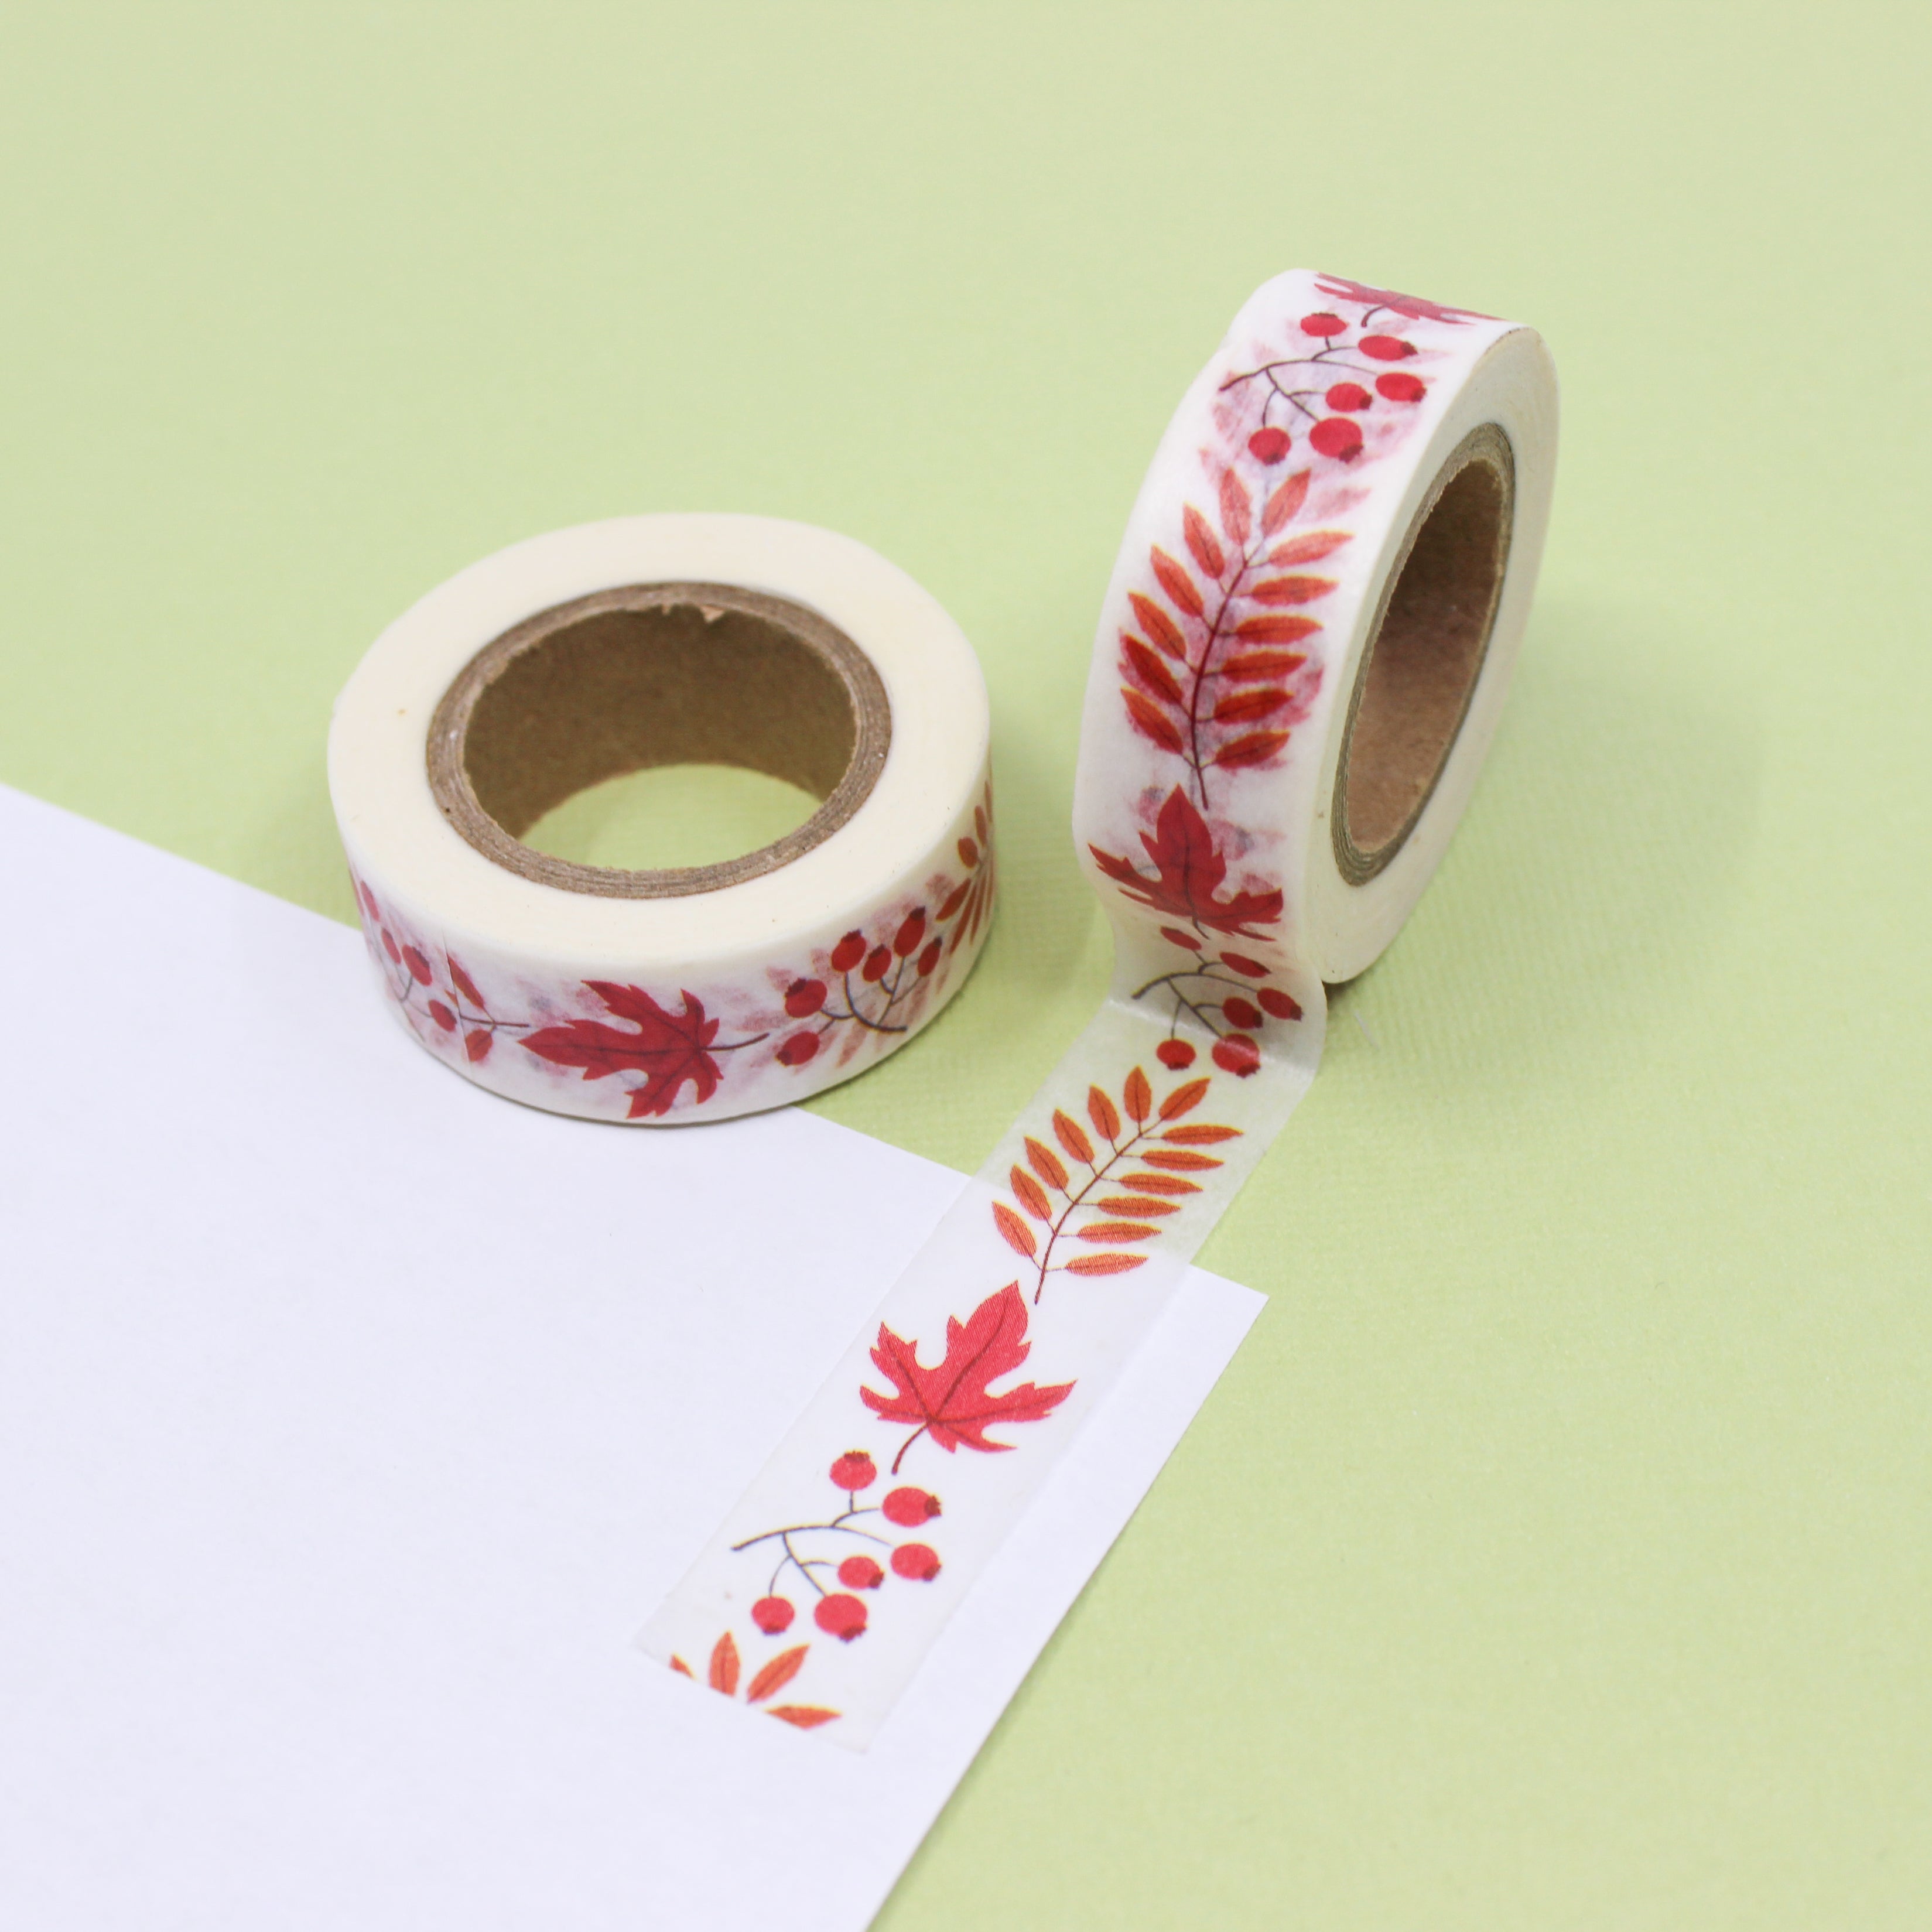 This is an orange leaf with seeds themed washi tape from BBB Supplies Craft Shop